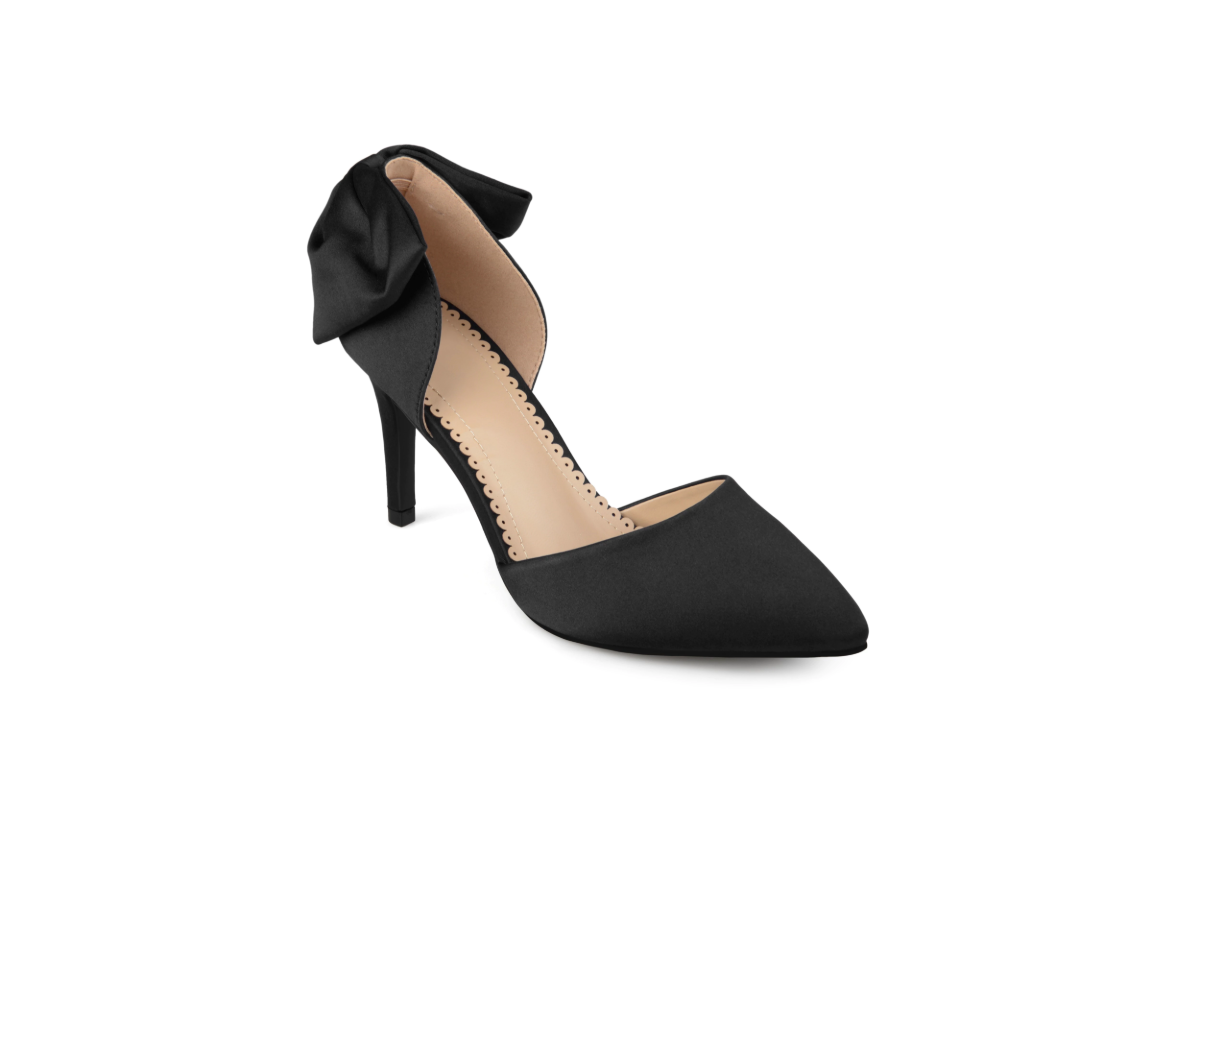 Journee Collection Women's 'Tanzi' Bow Pointed Toe D'orsay Pumps